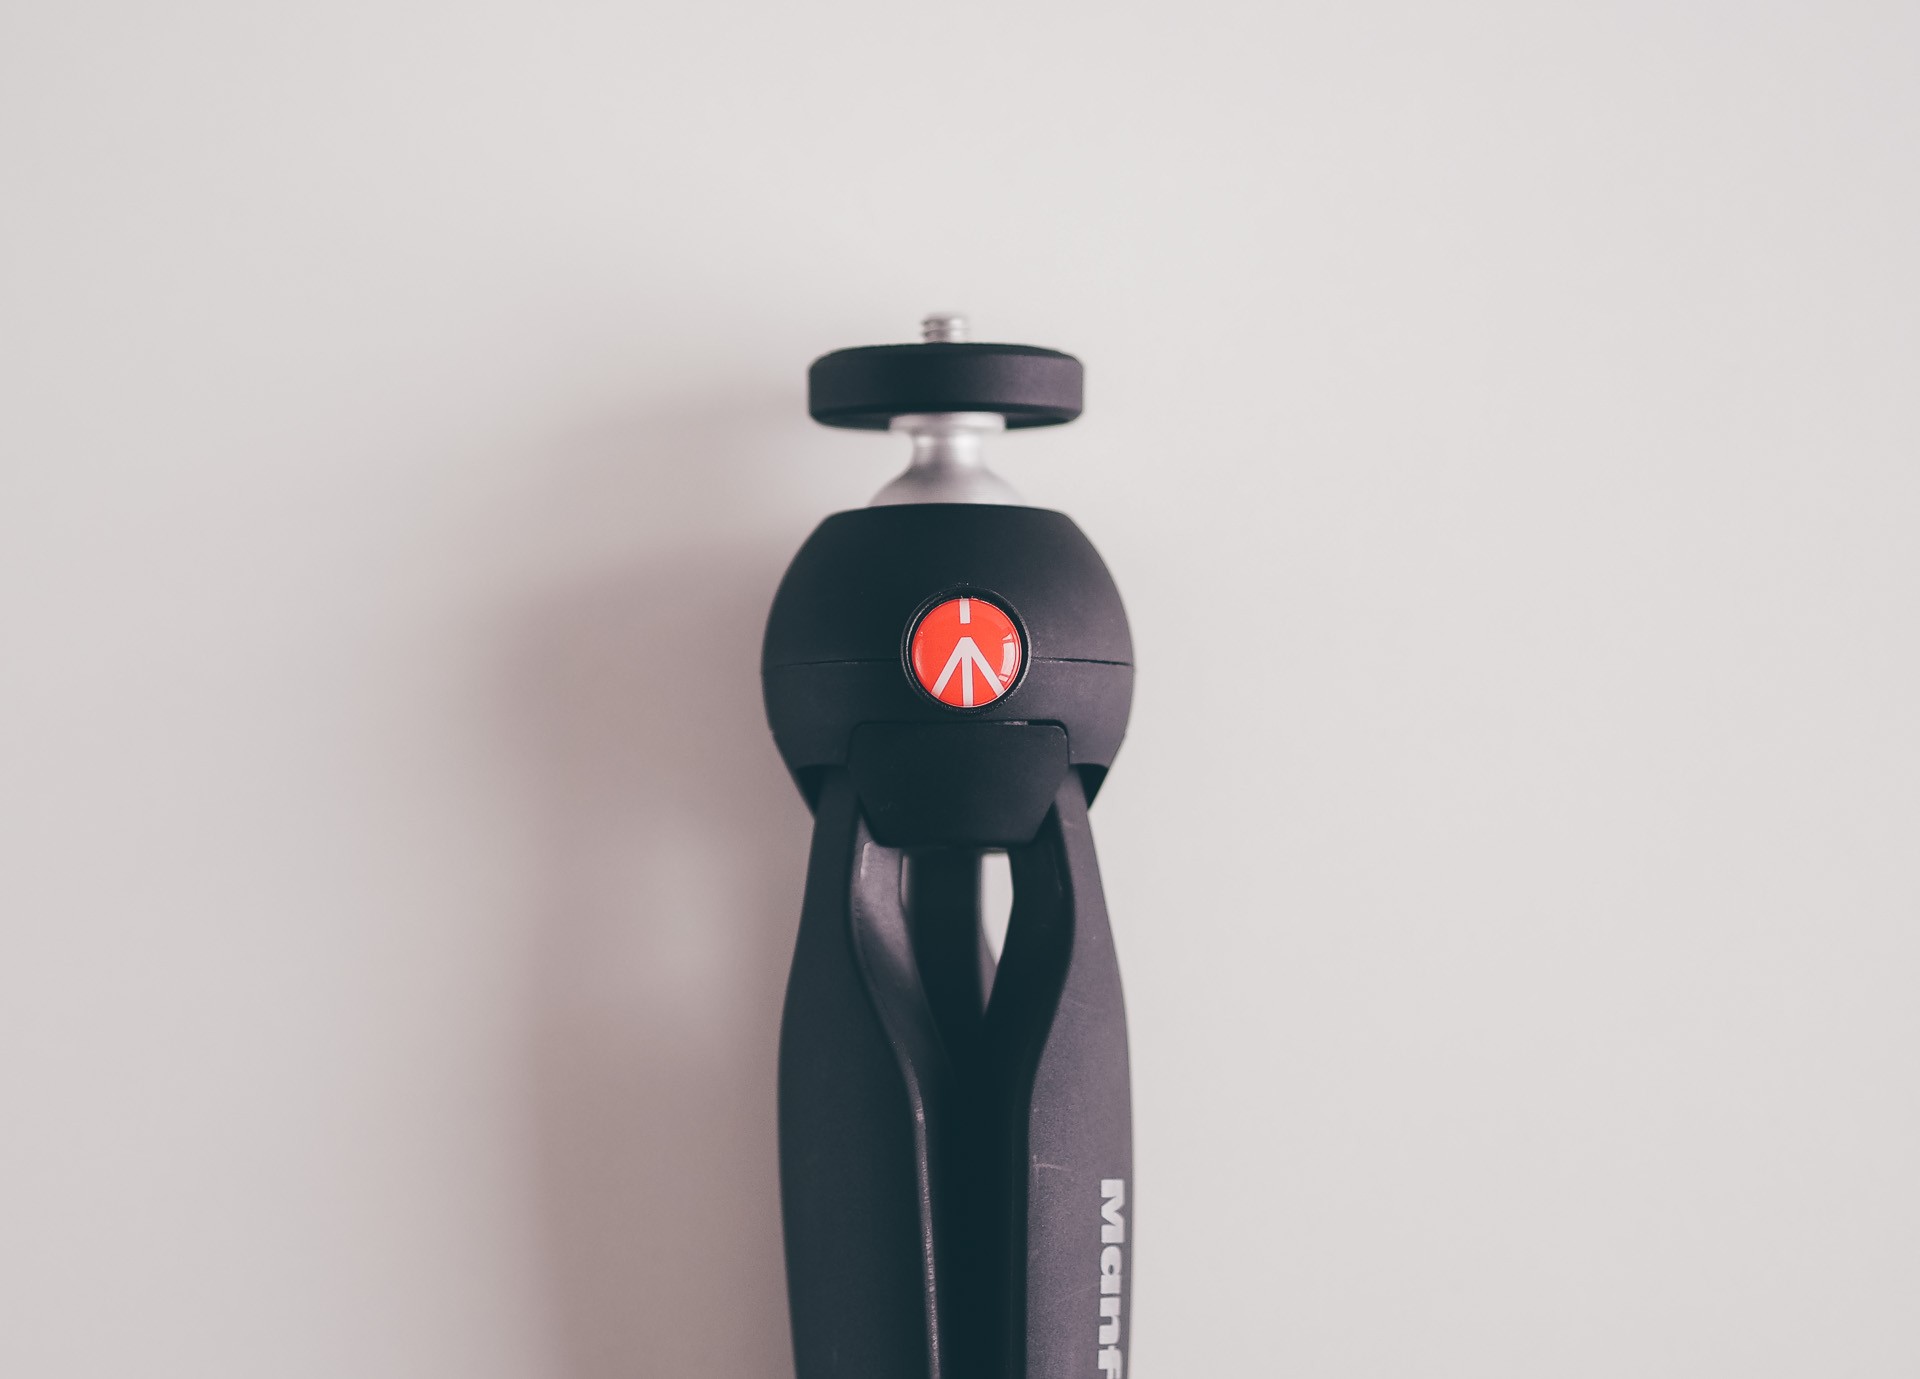 The push button mechanism is adorned with Manfrotto’s logo.